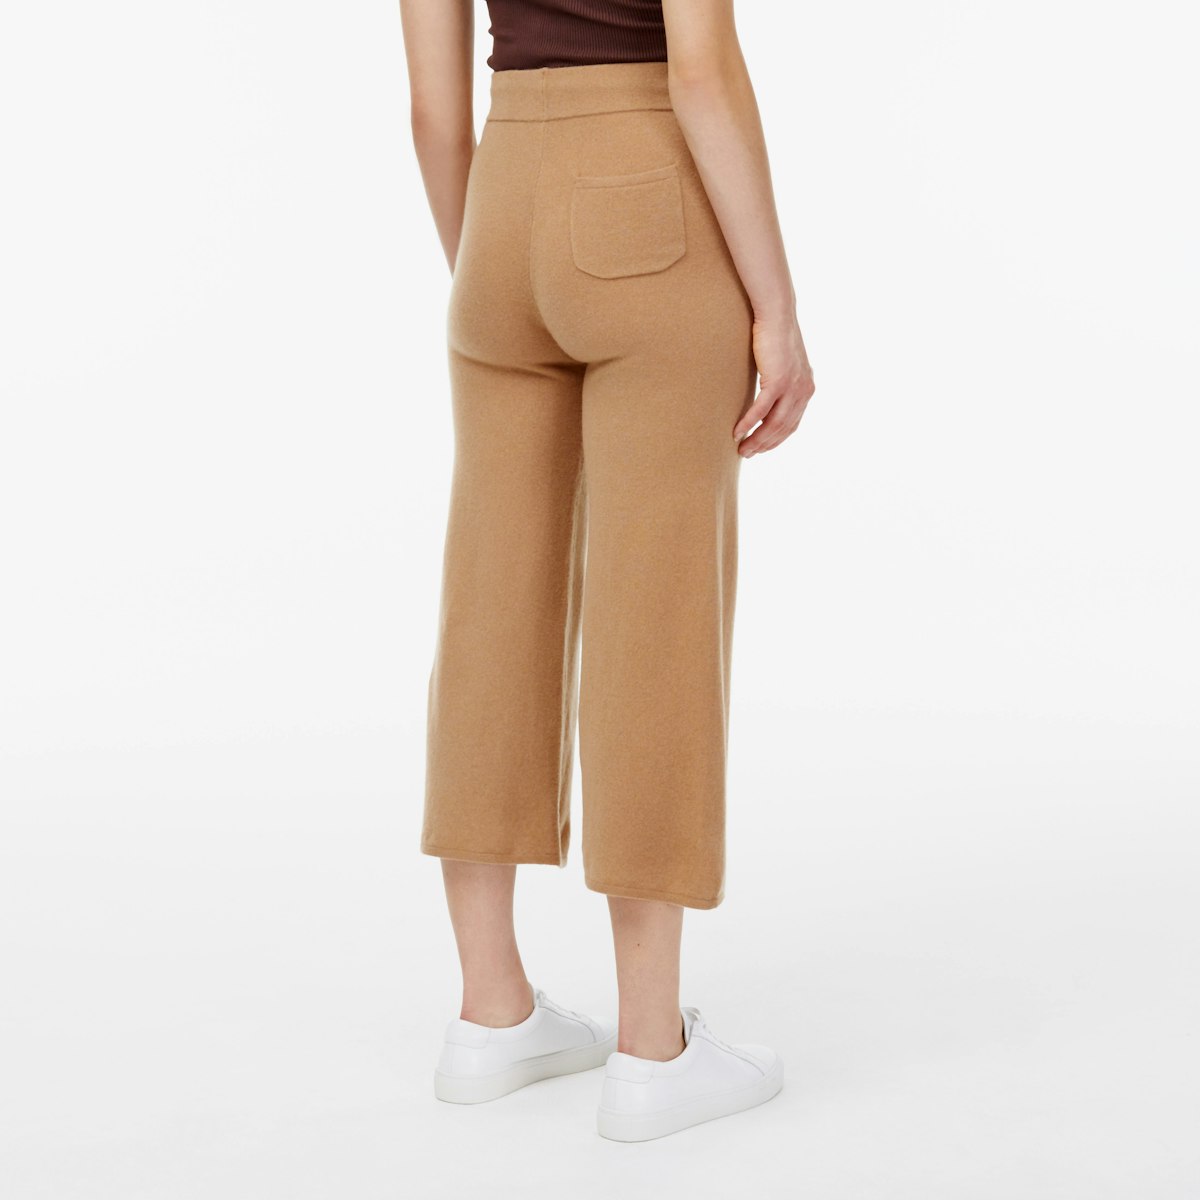 Recycled_Cashmere_LoungePant_Camel_Womens_OnFigure_1x1_1884.jpg